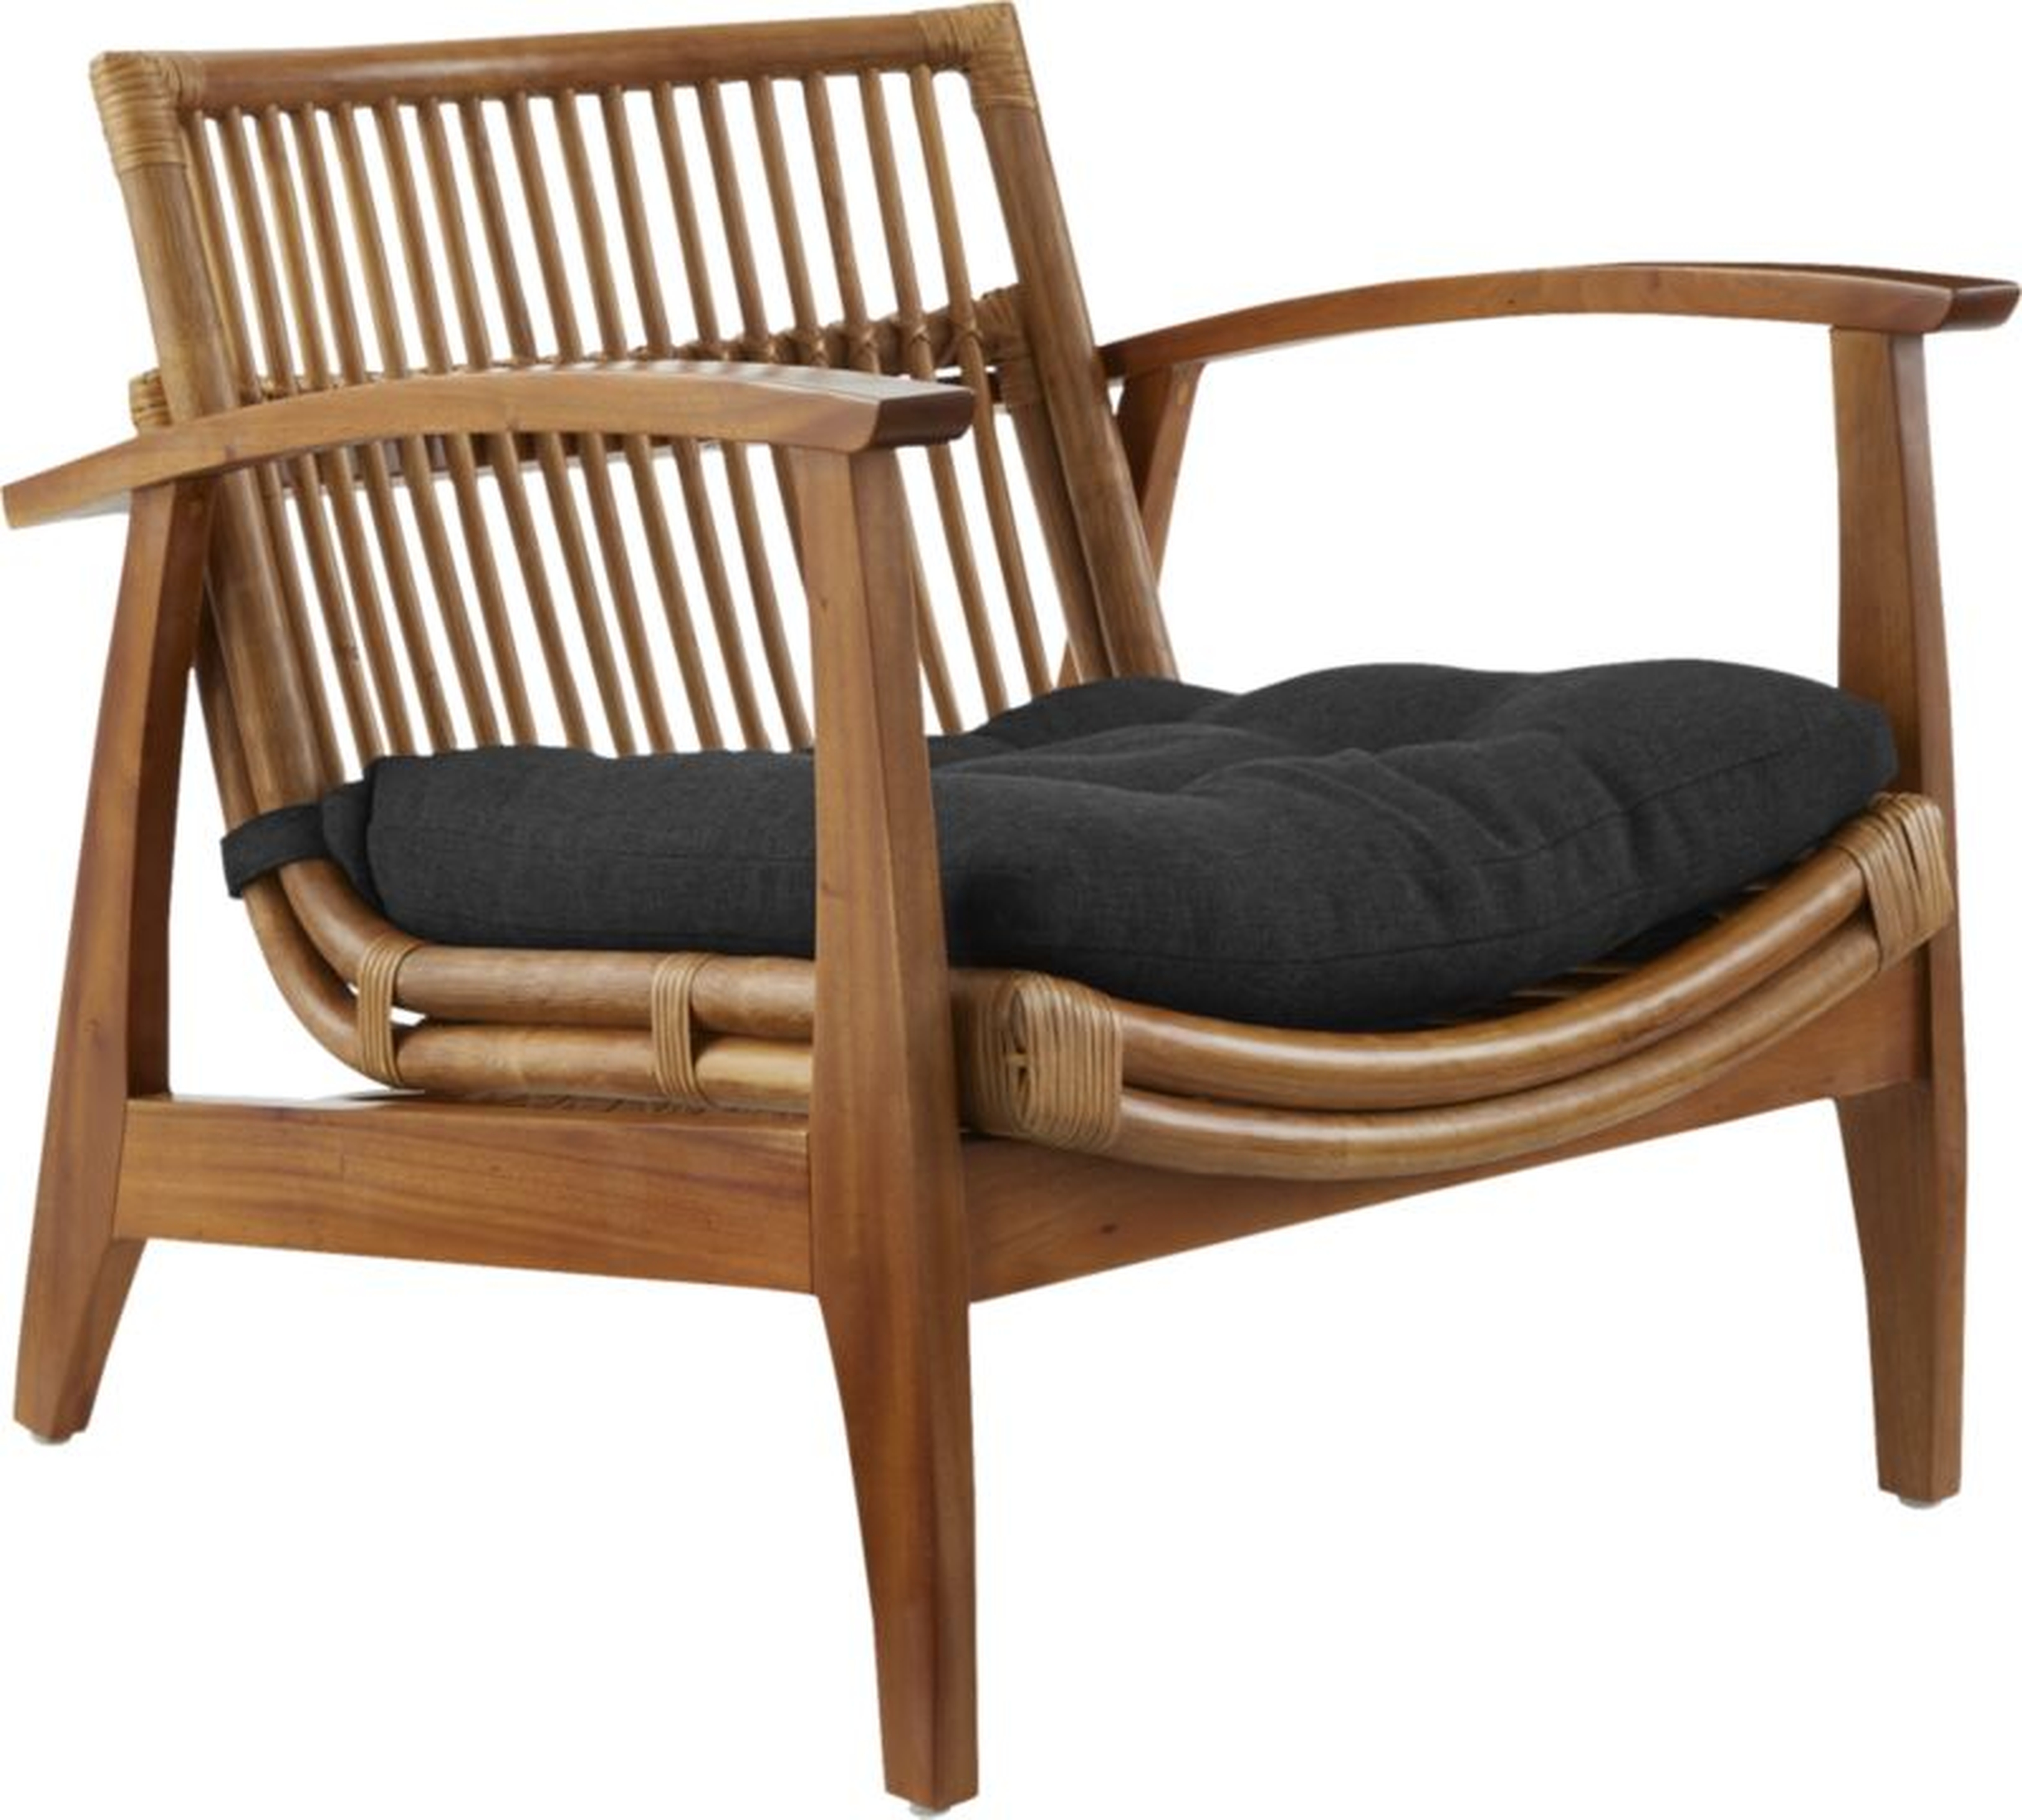 Noelie Rattan Lounge Chair with Black Cushion - CB2